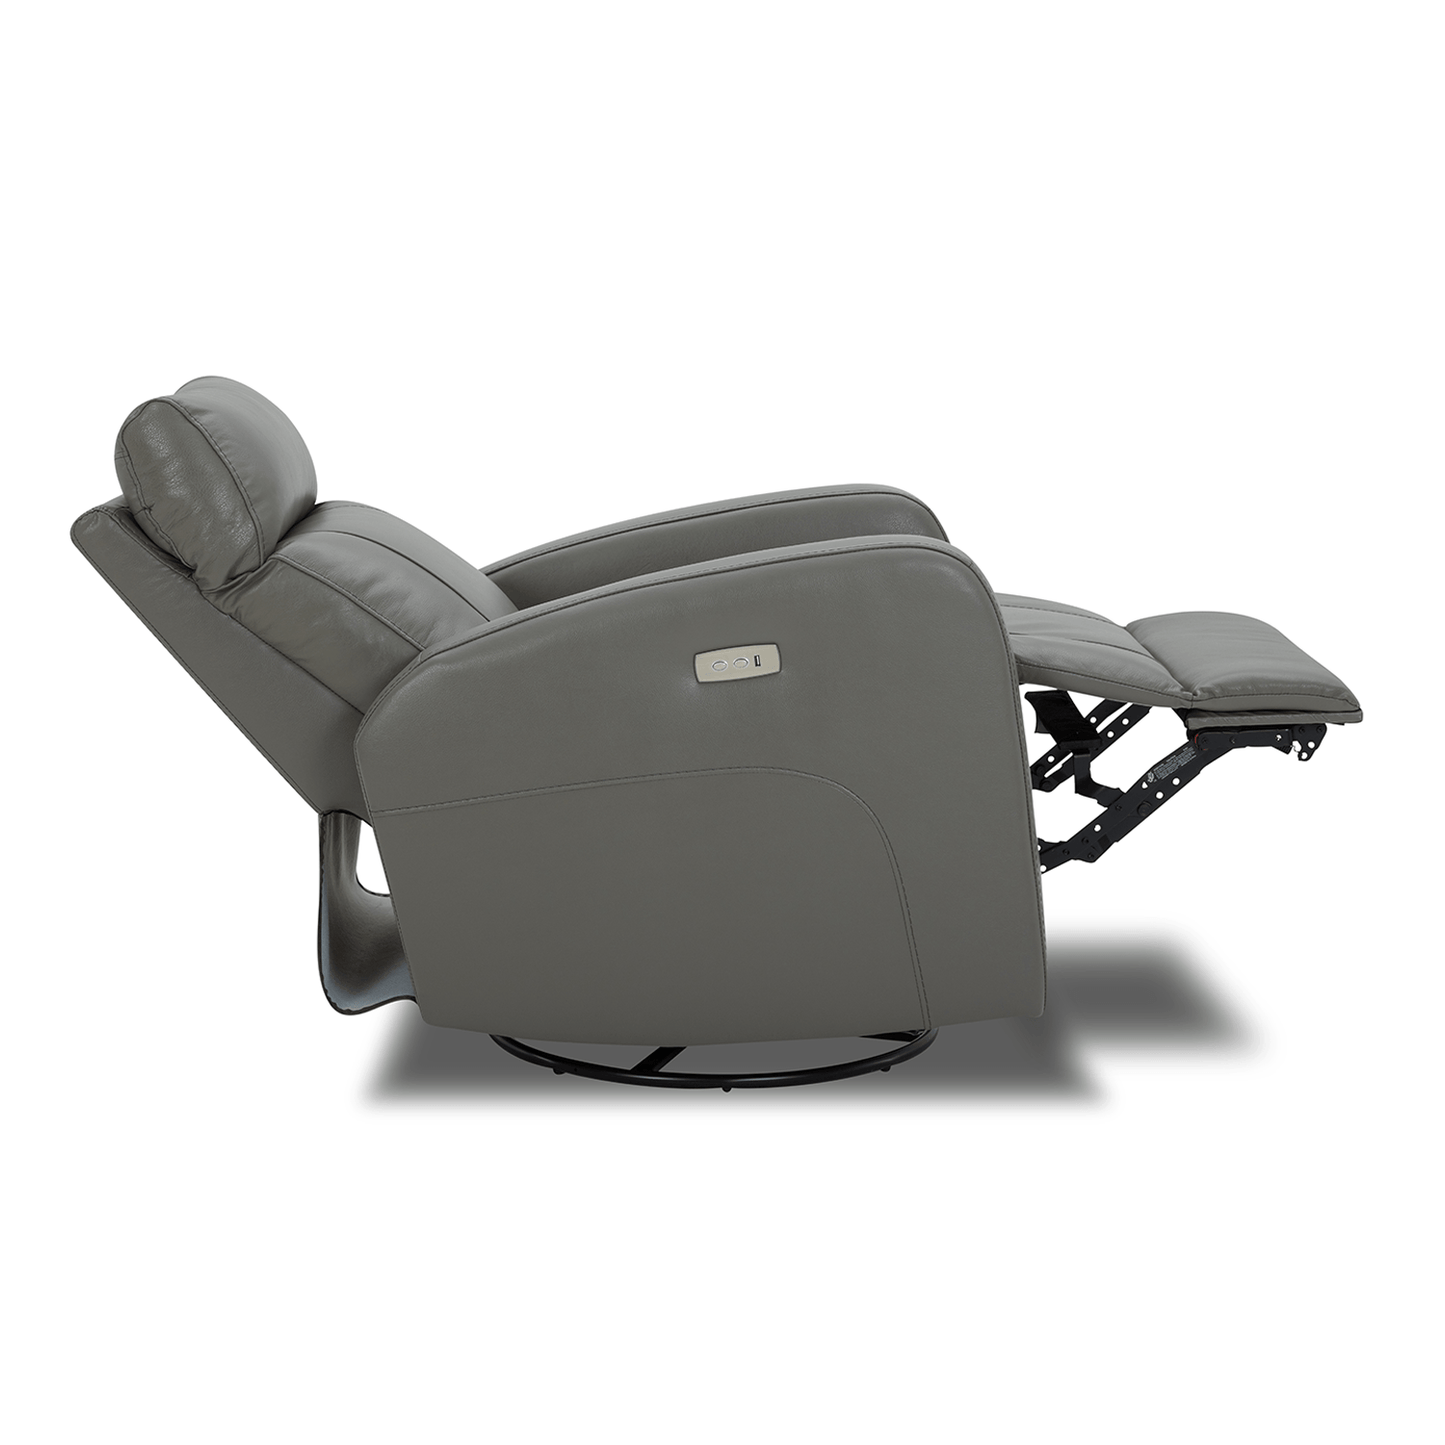 CHITA LIVING-Joy Power Swivel Recliner with Manual Headrest-Recliners-Genuine Leather-Gray-